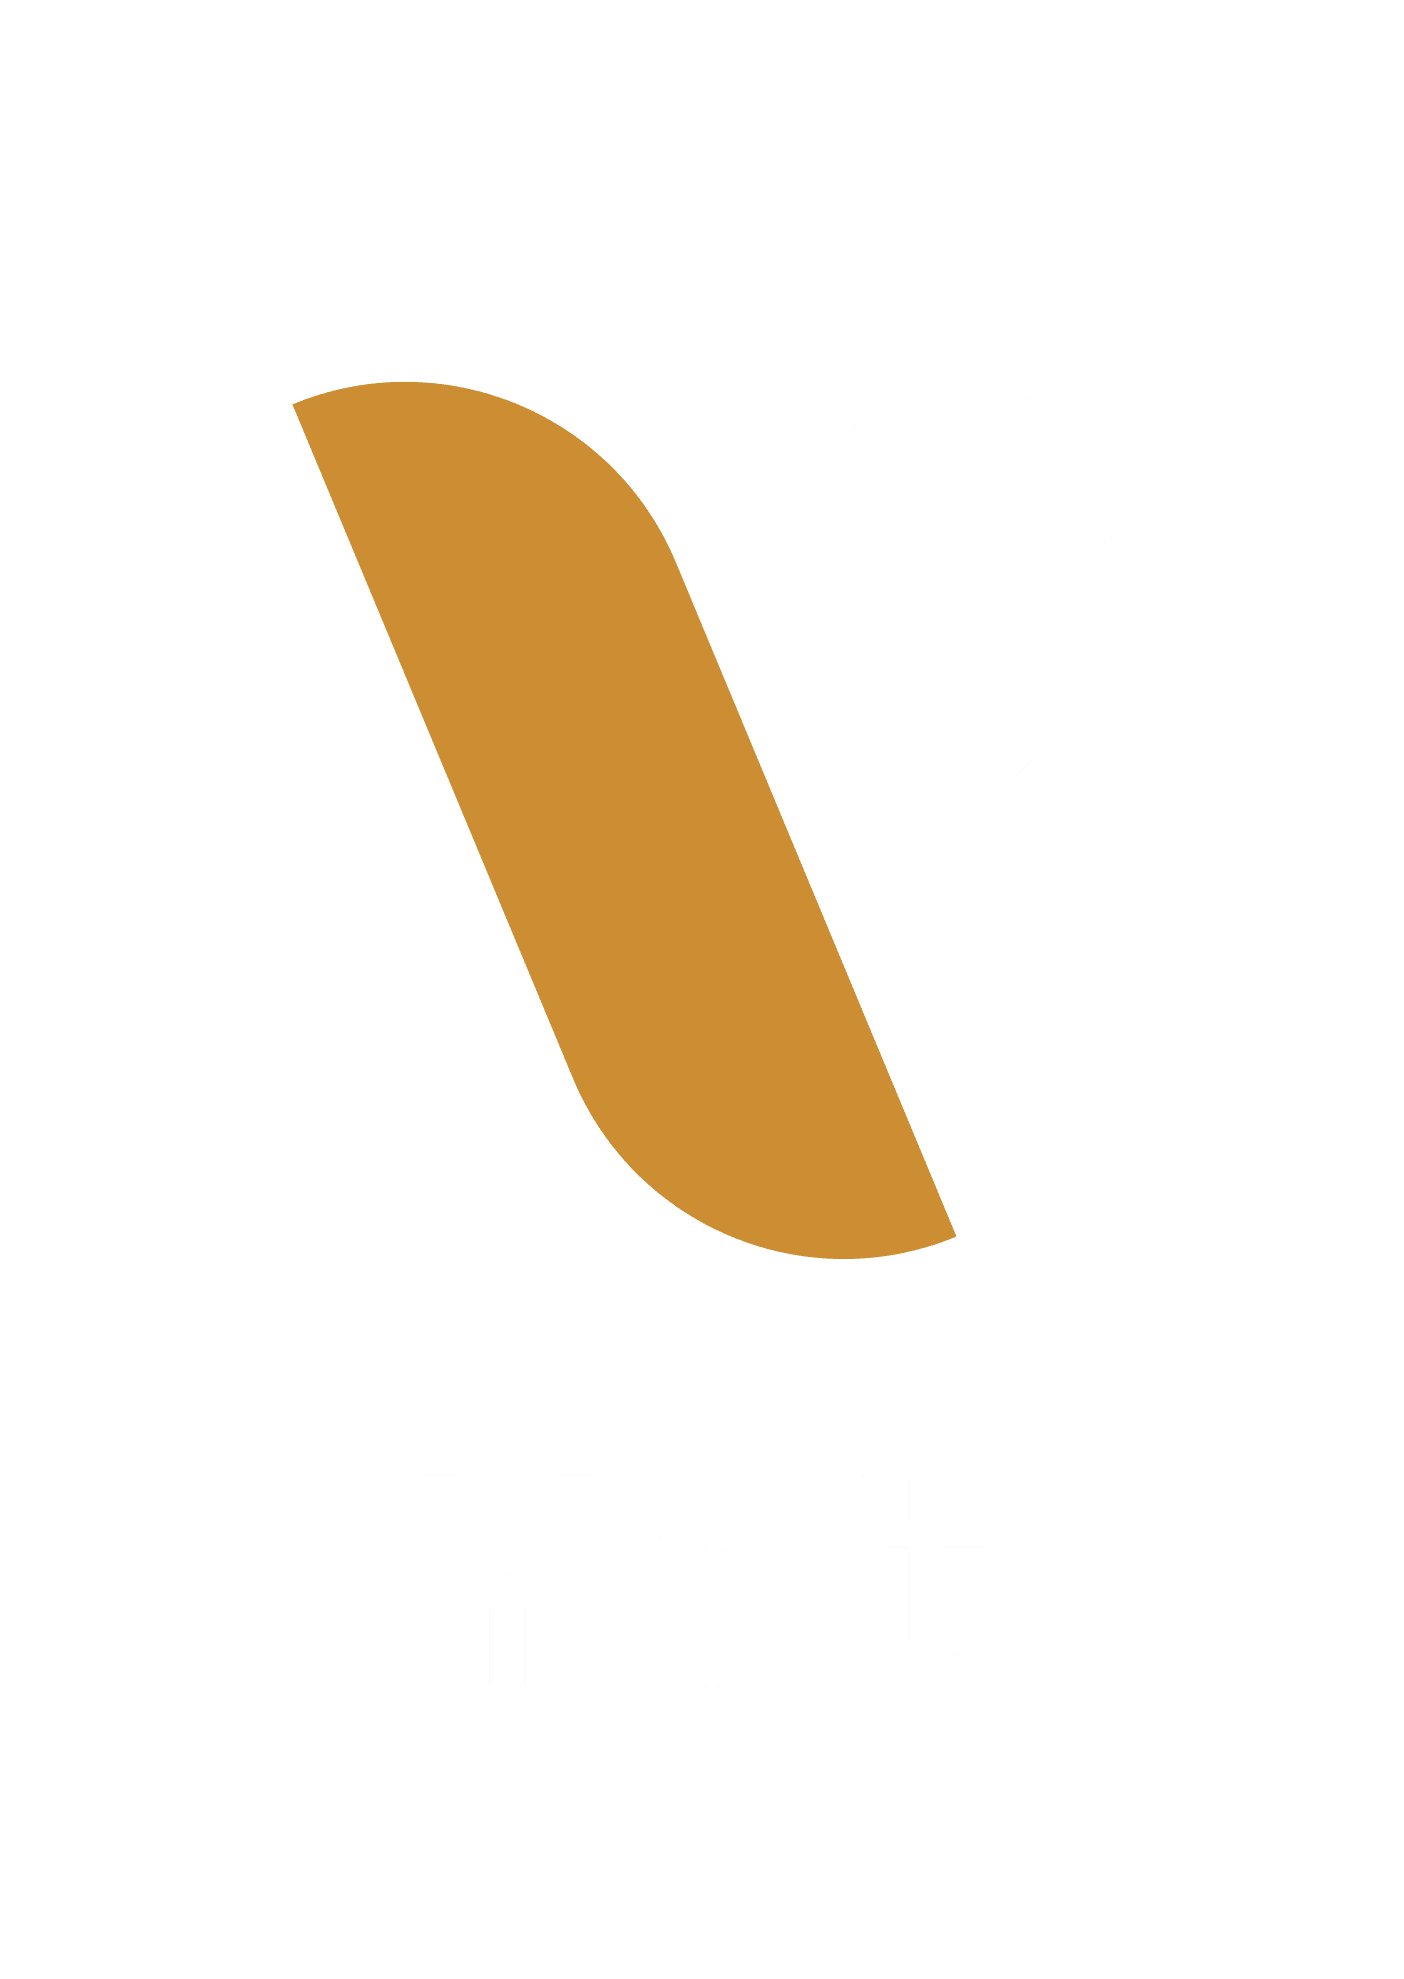 Ybit Wallet: The Best Crypto Wallet for Web3, DeFi, and NFTs